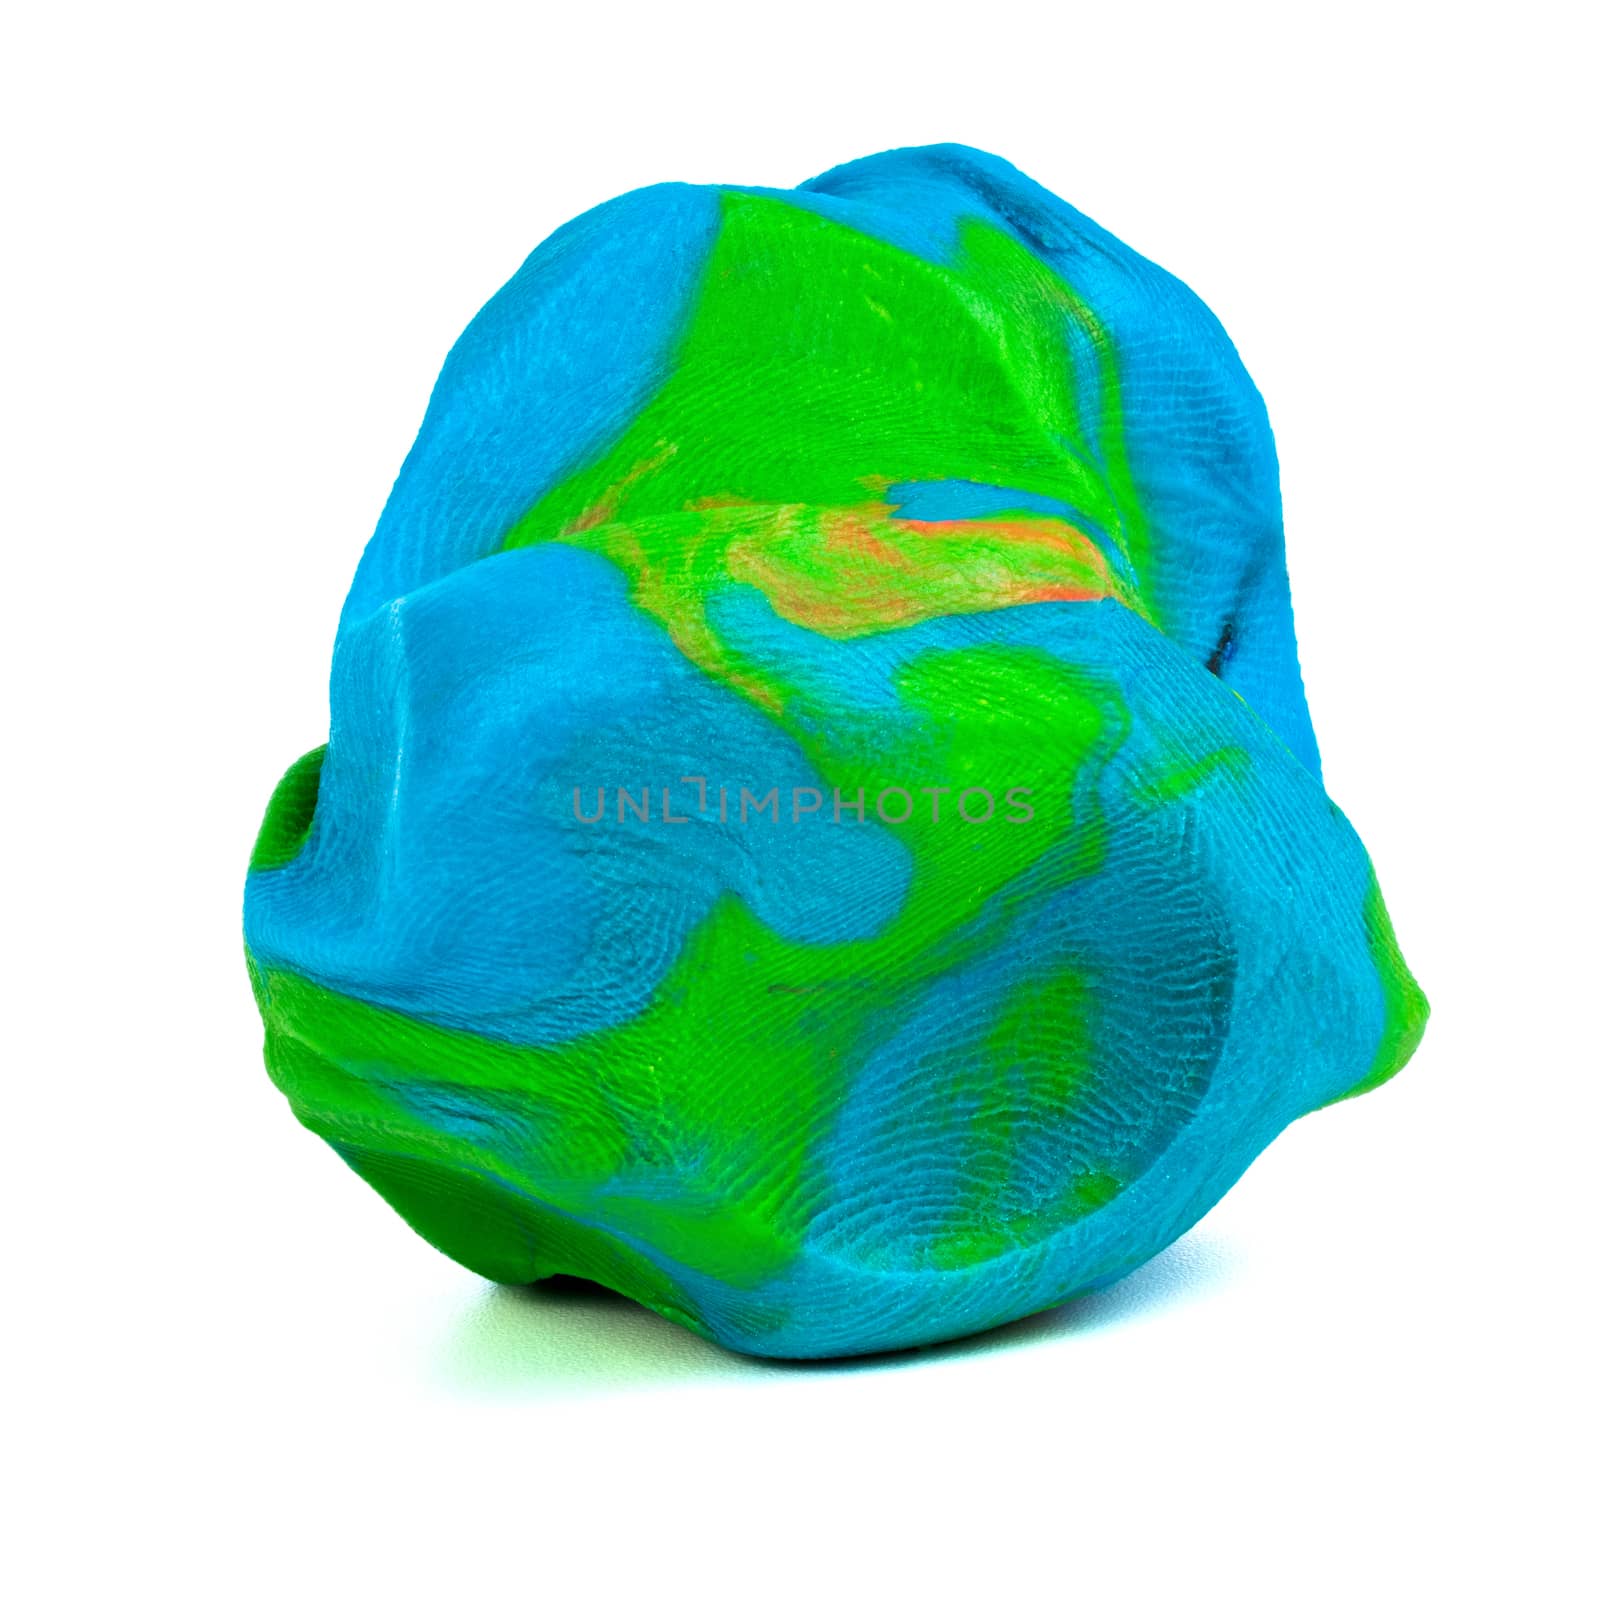 Mixed blue-green-red playdough ball with distinct fingerprints isolated on the white background by z1b